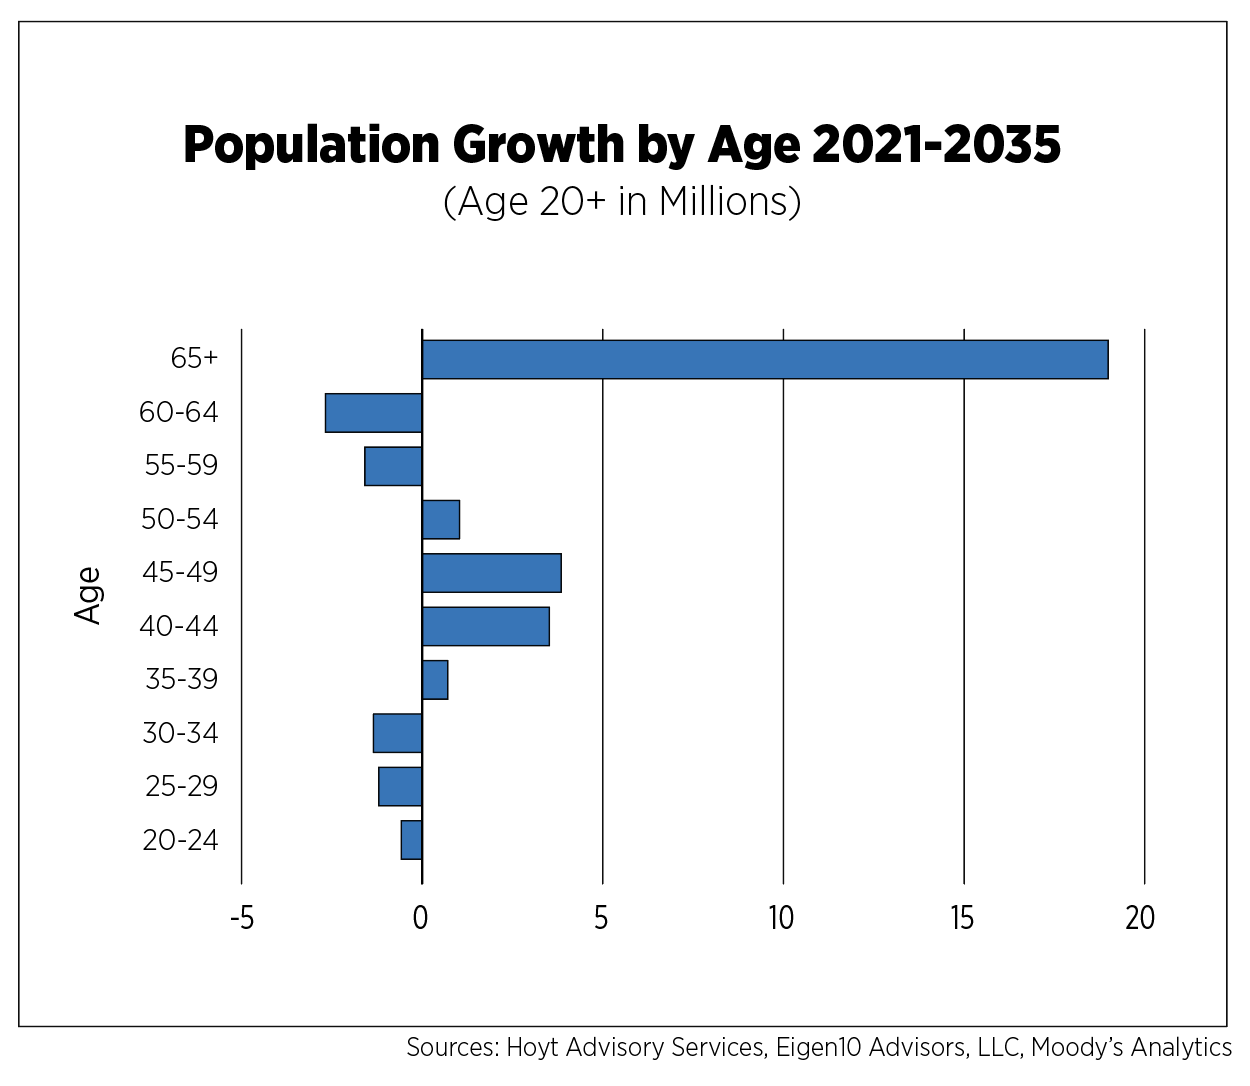 Population Growth by Age 2021-2035